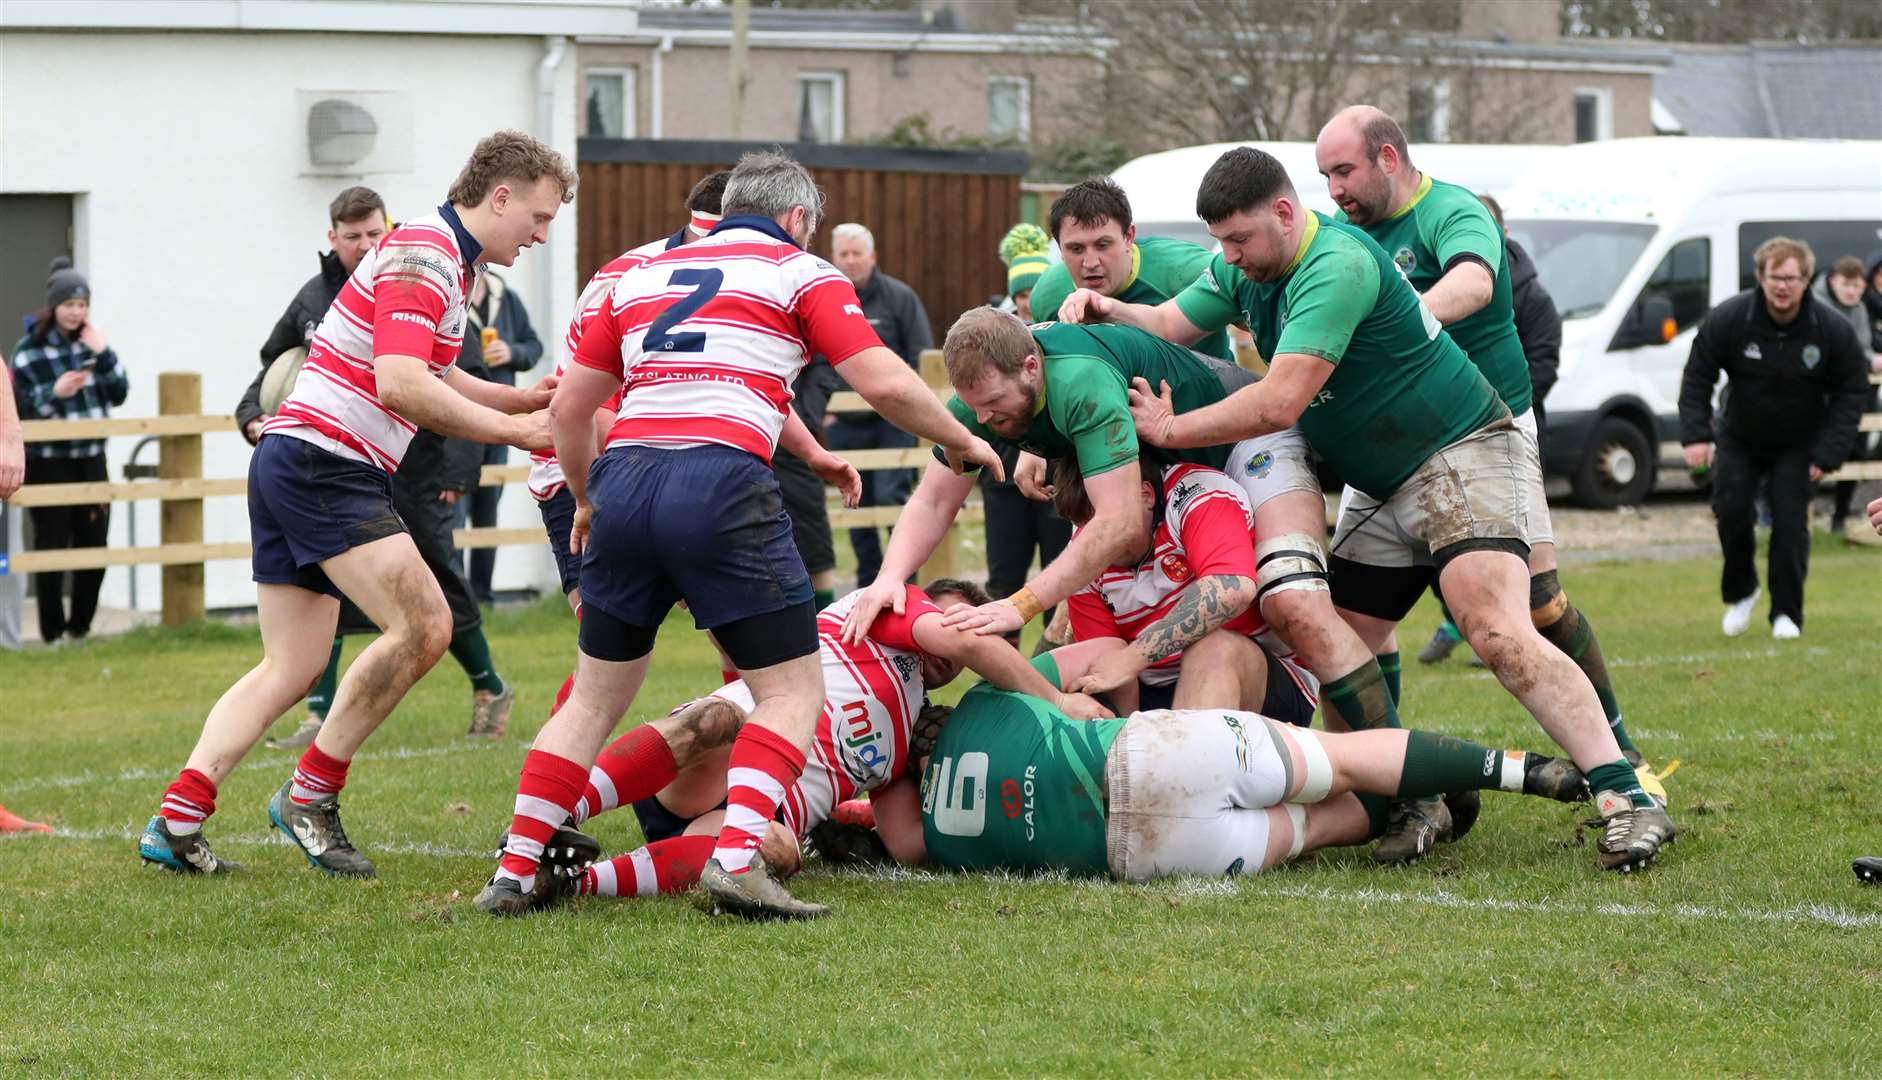 Kevin Budge is stopped inches from the try-line. Picture: James Gunn